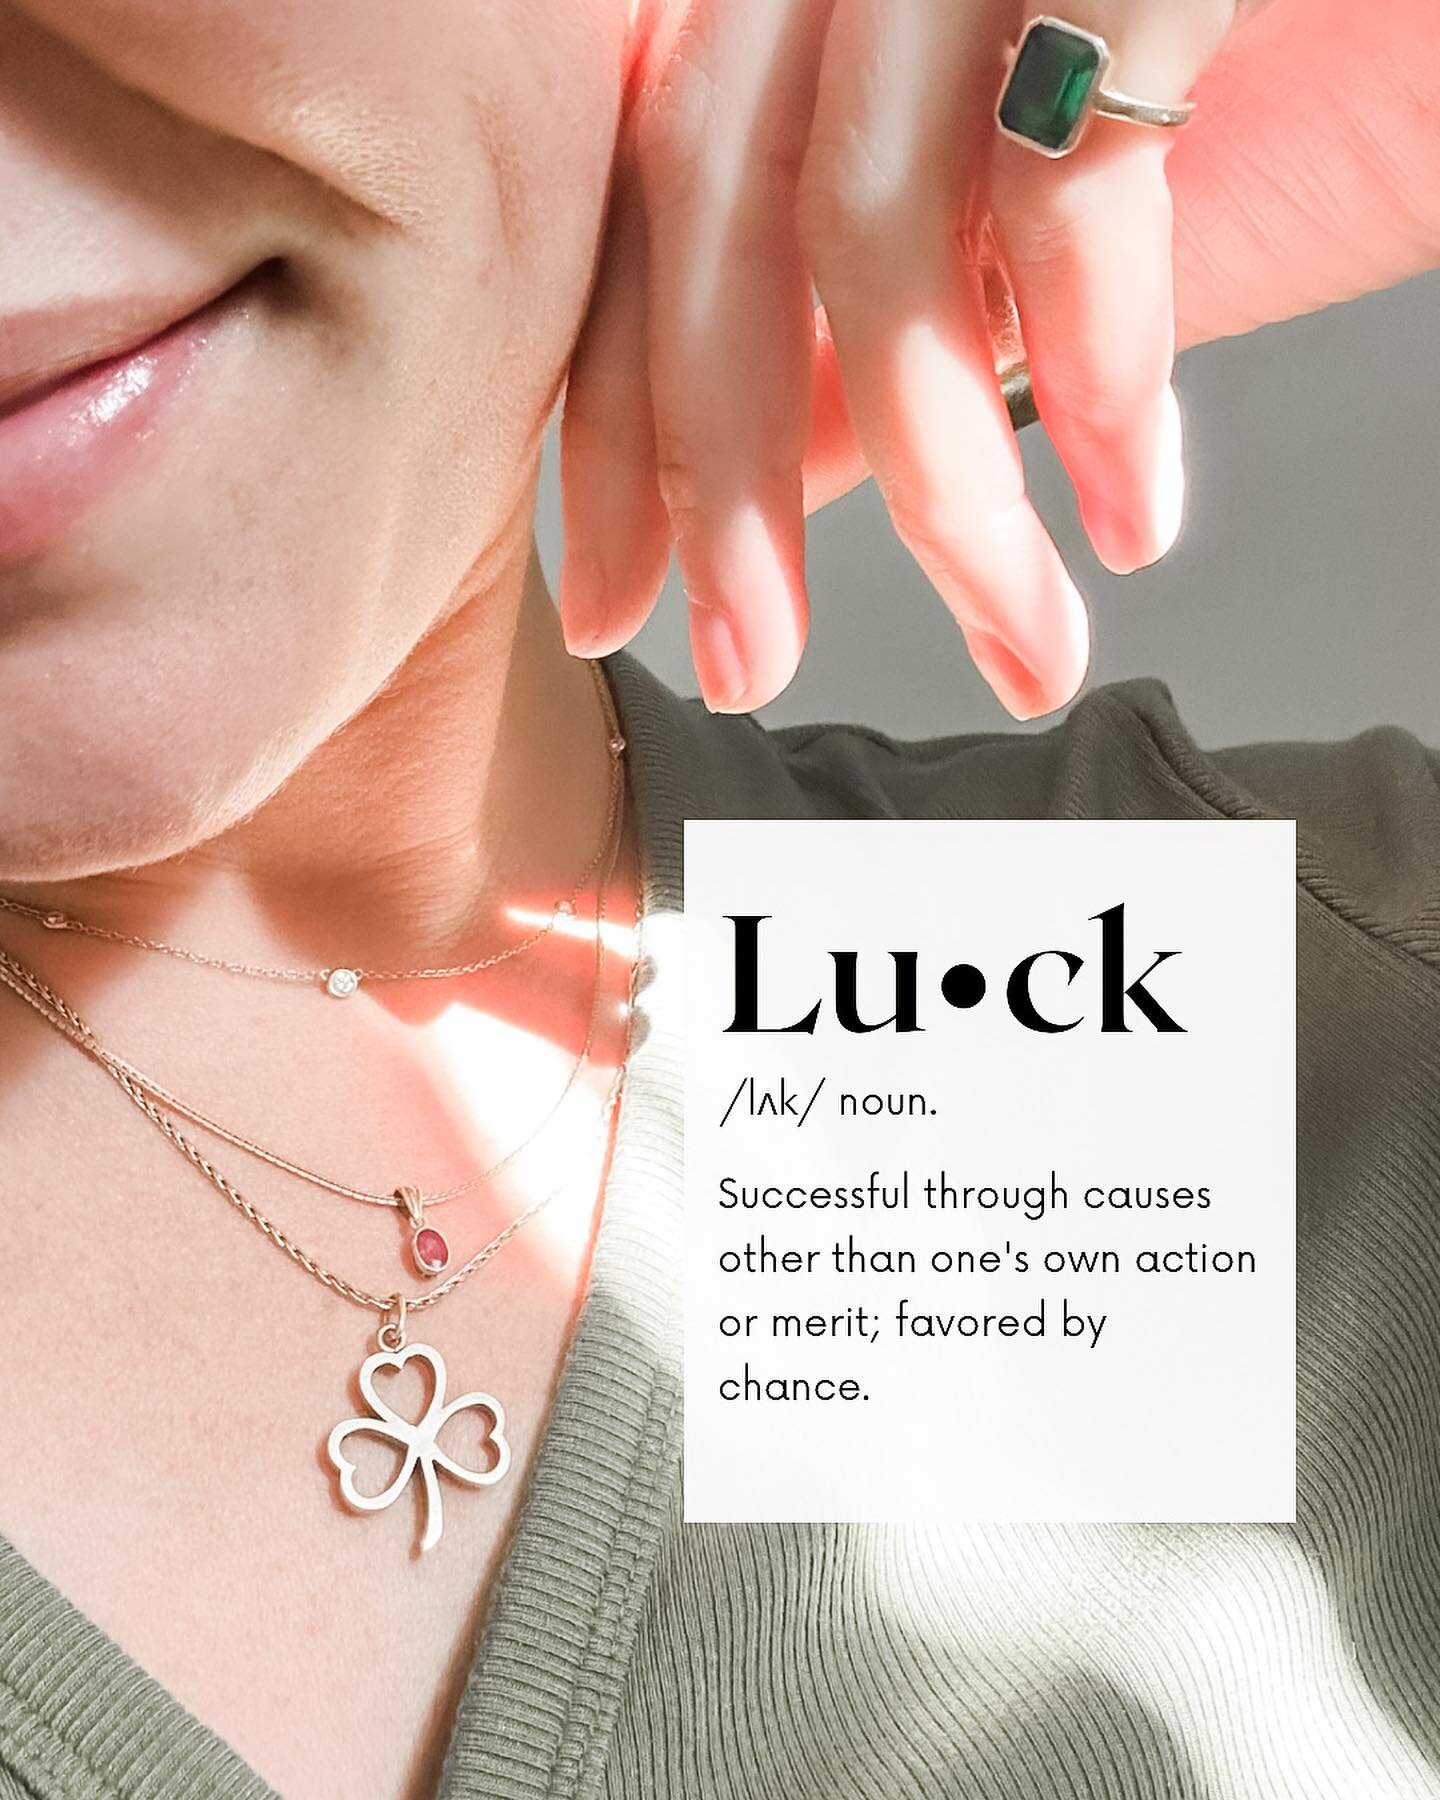 🍀 the truth about luck🍀

From the Vedic perspective, and based on it&rsquo;s very definition, luck involves a degree of randomness. 

My teacher, @thethomknoles, says, 
&ldquo;Luck, as it turns out, has to do with well-deserved, self-created good f